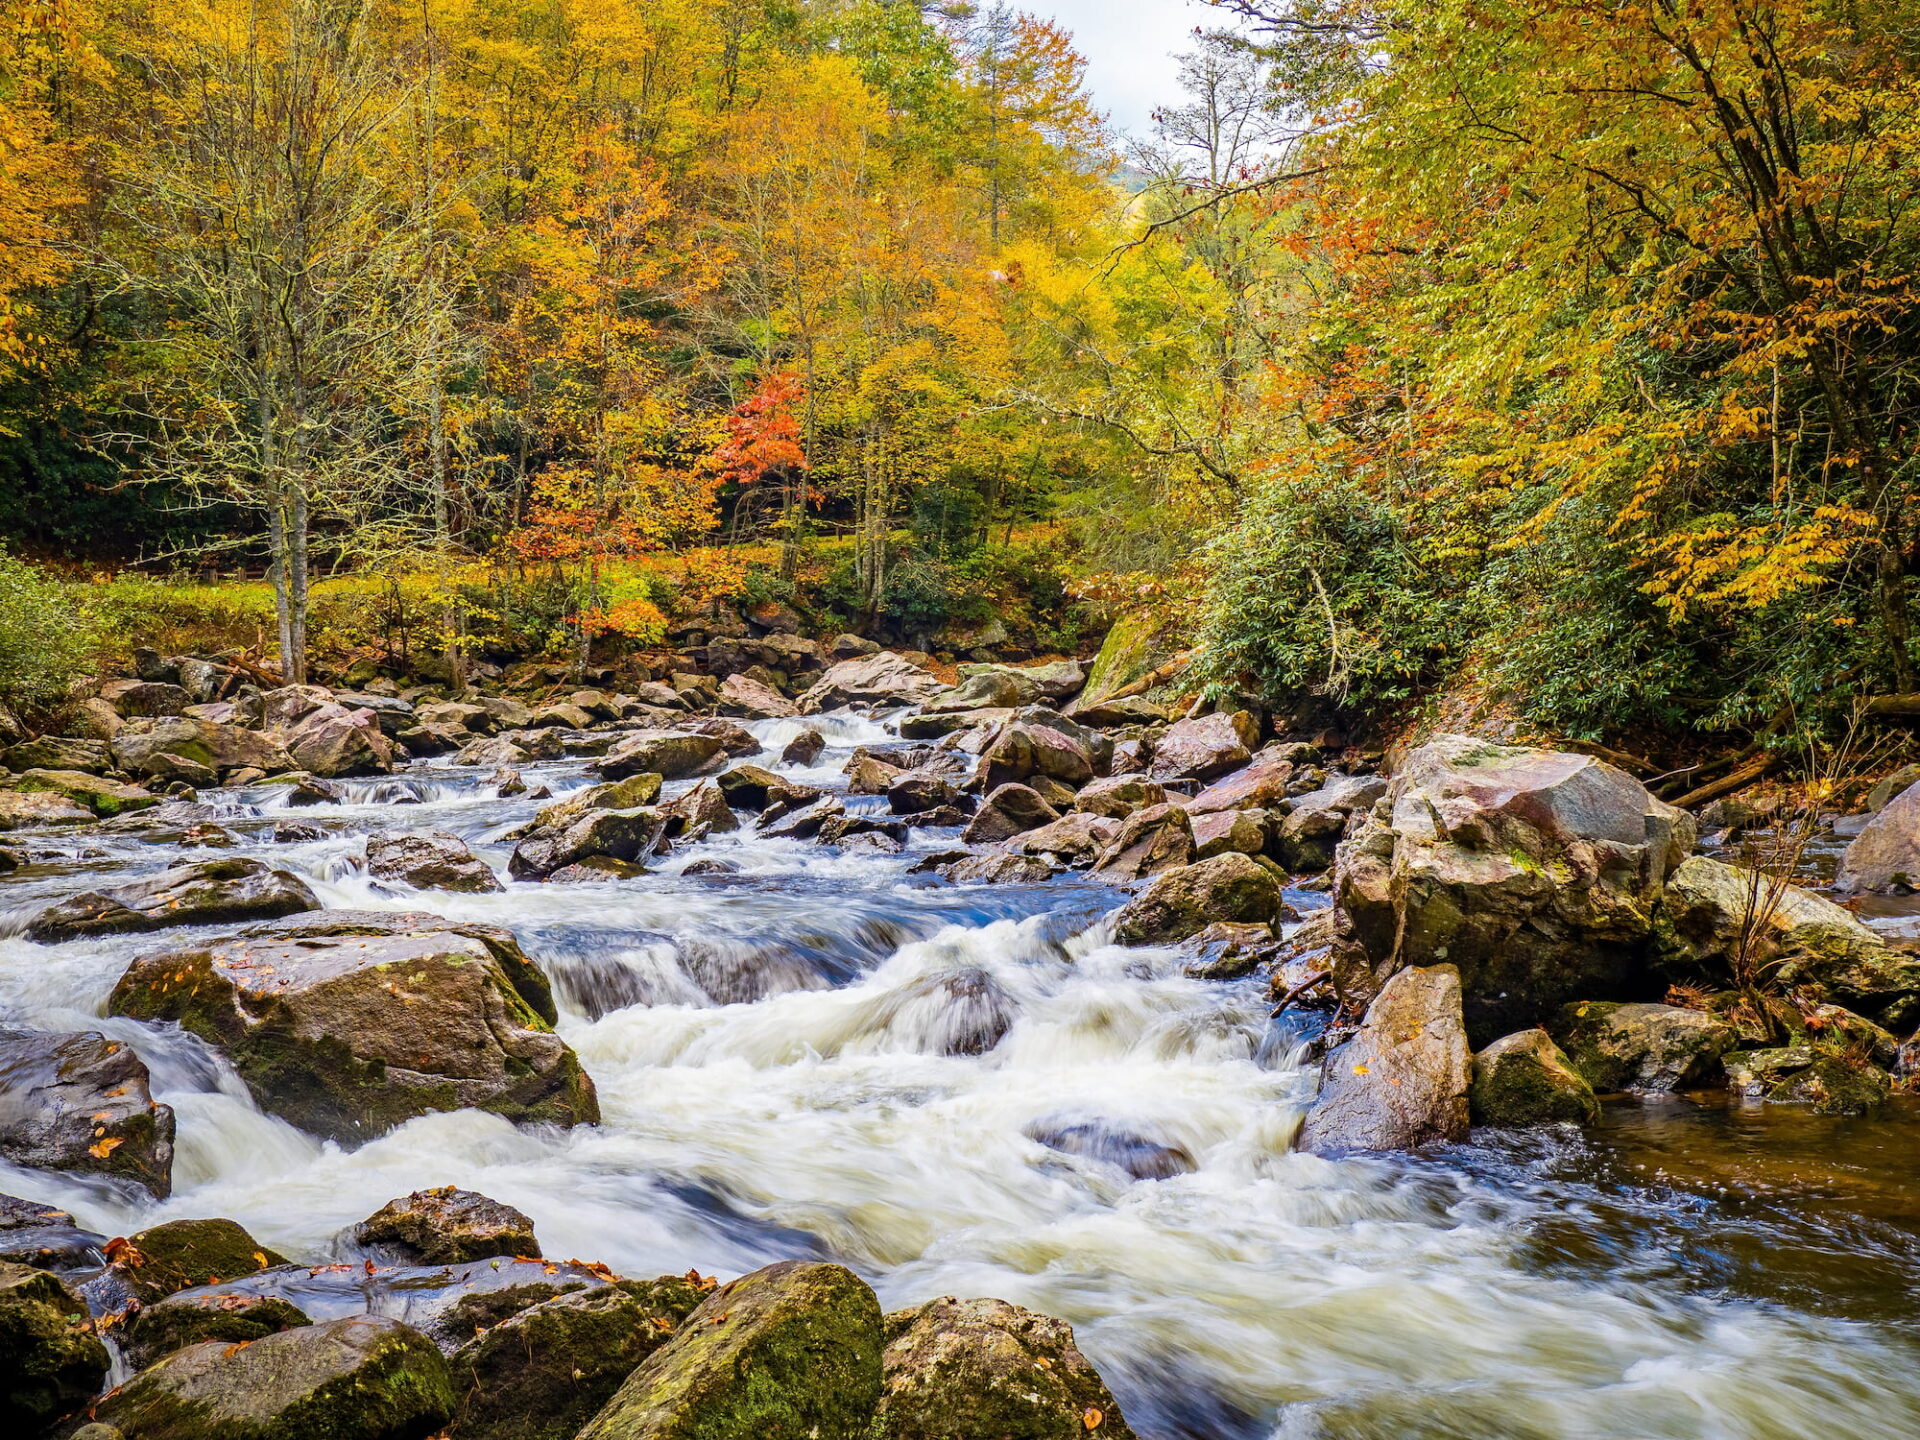 Nantahala National Forest in Franklin County, NC